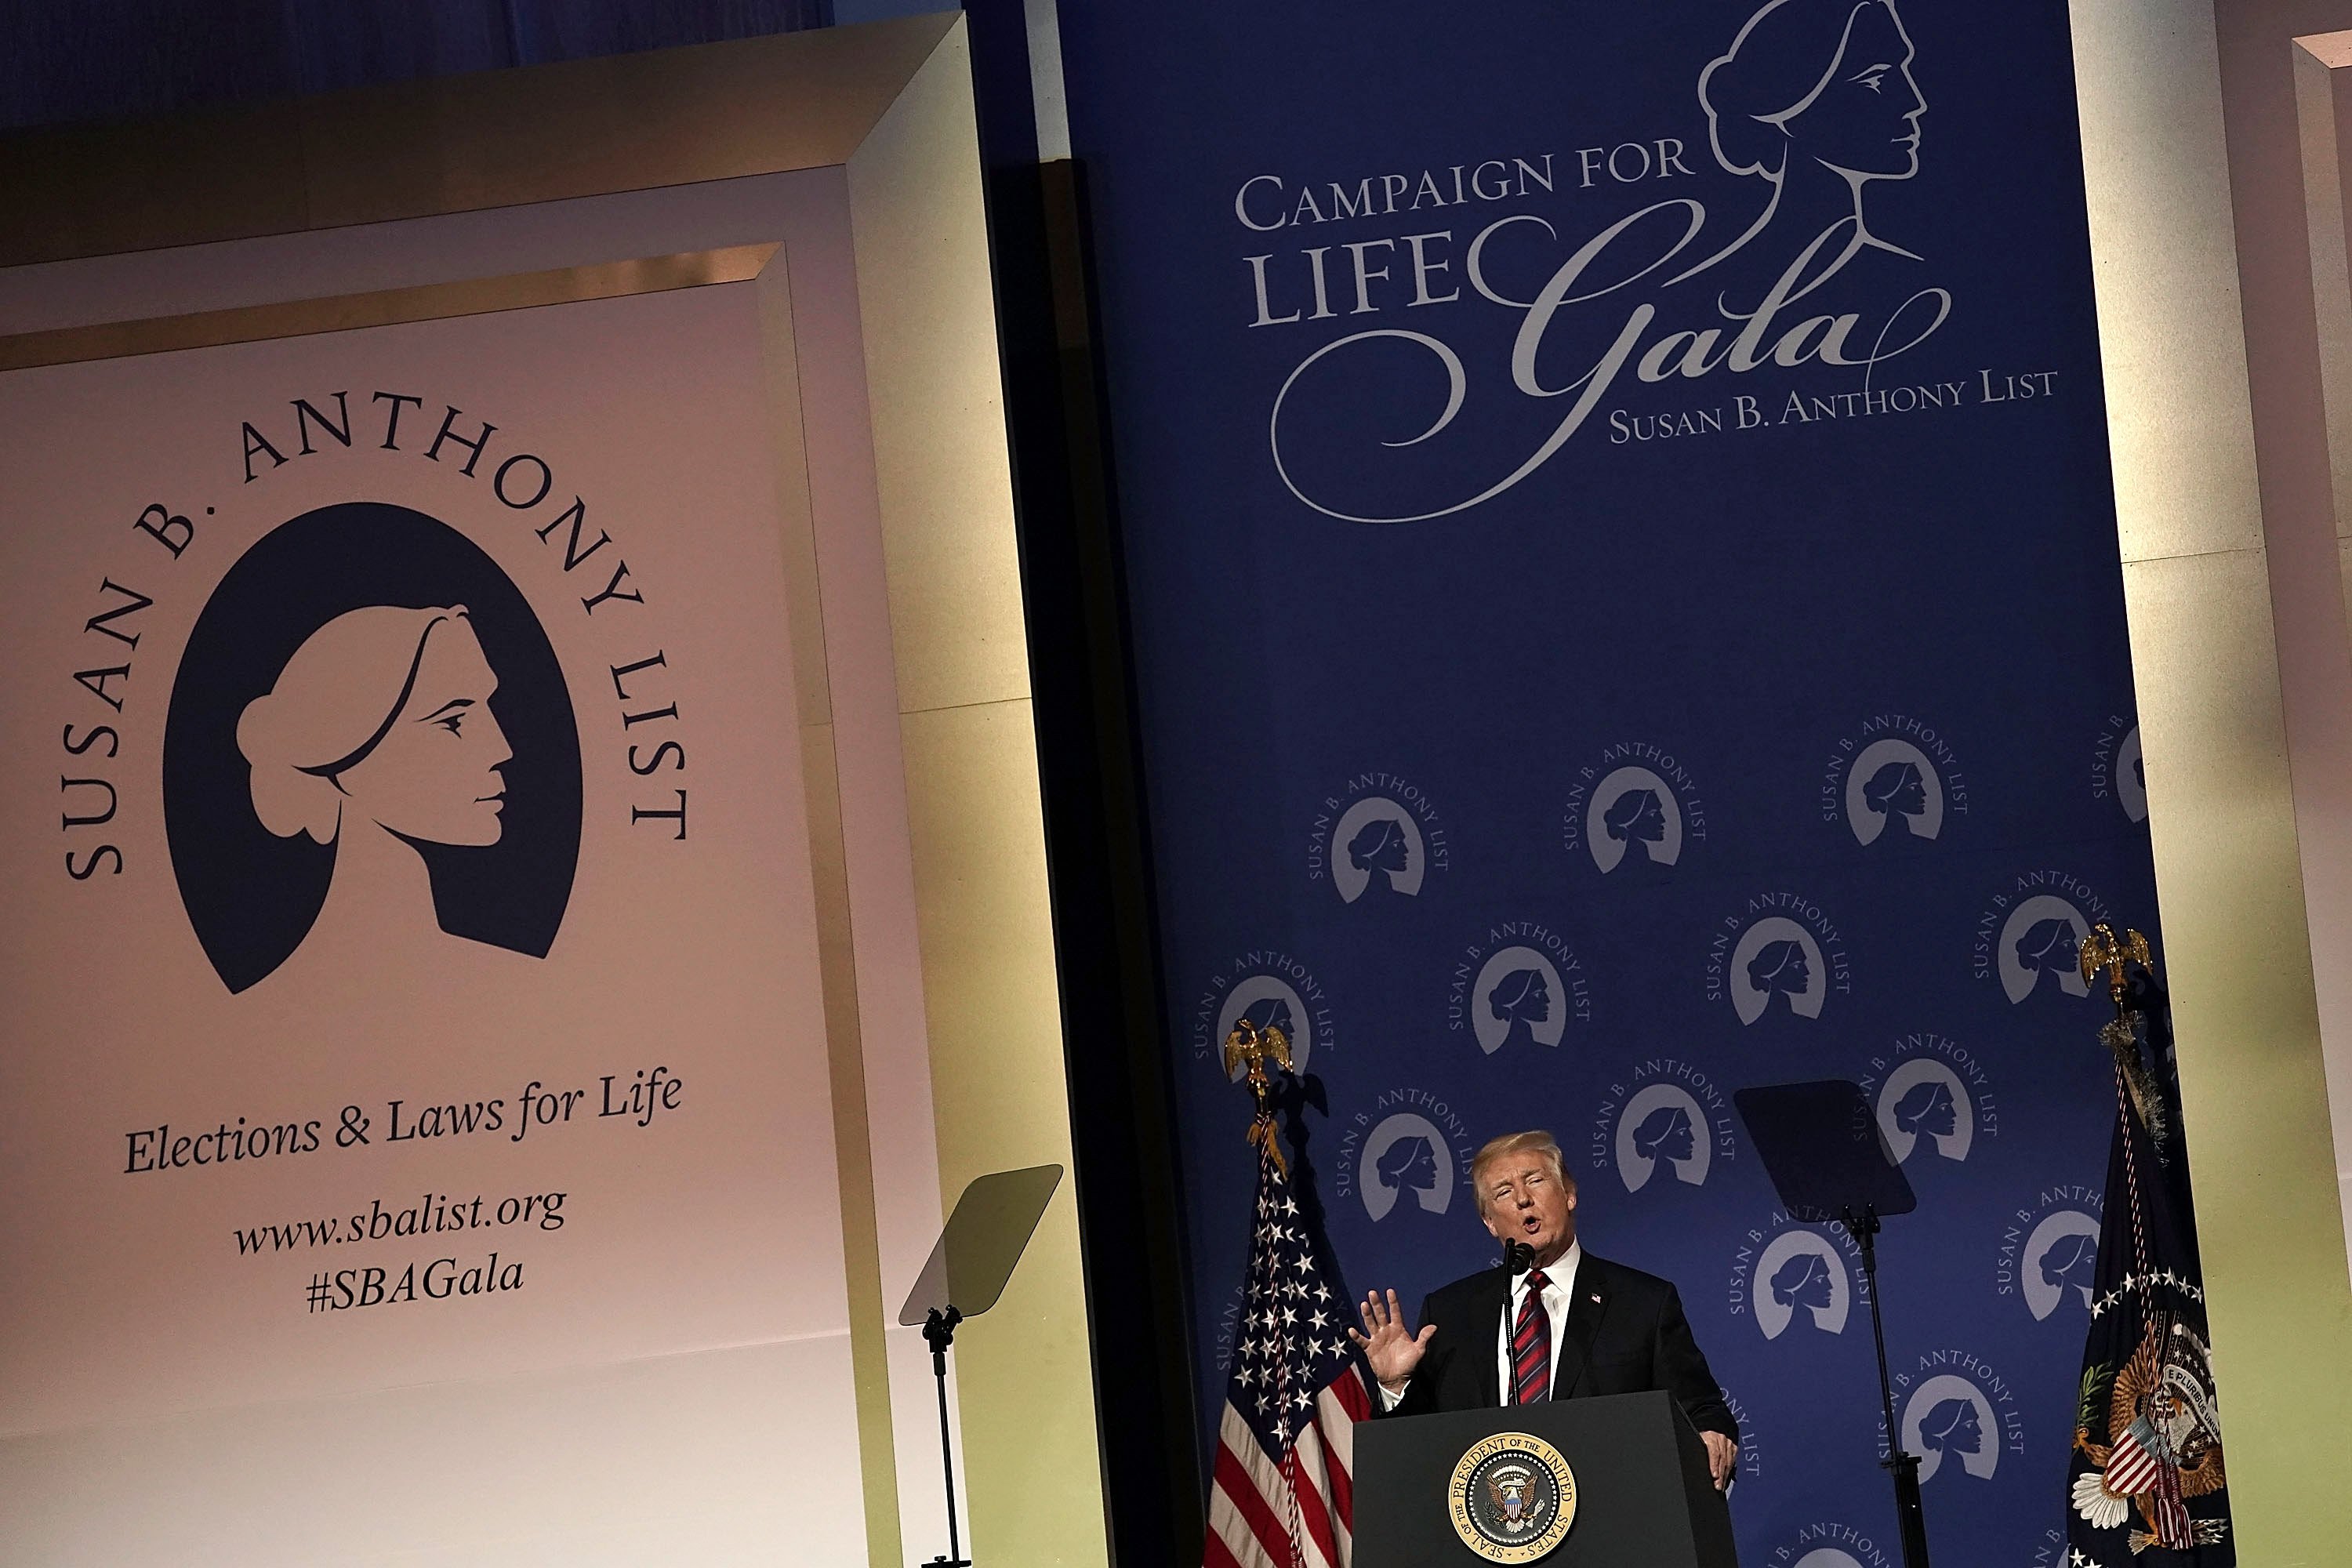 WASHINGTON, DC - MAY 22: U.S. President Donald Trump speaks during the Susan B. Anthony List's 11th annual Campaign for Life Gala at the National Building Museum May 22, 2018 in Washington, DC. President Trump addressed the annual gala of the anti-abortion group and urged people to vote in the midterm election. (Photo by Alex Wong/Getty Images)